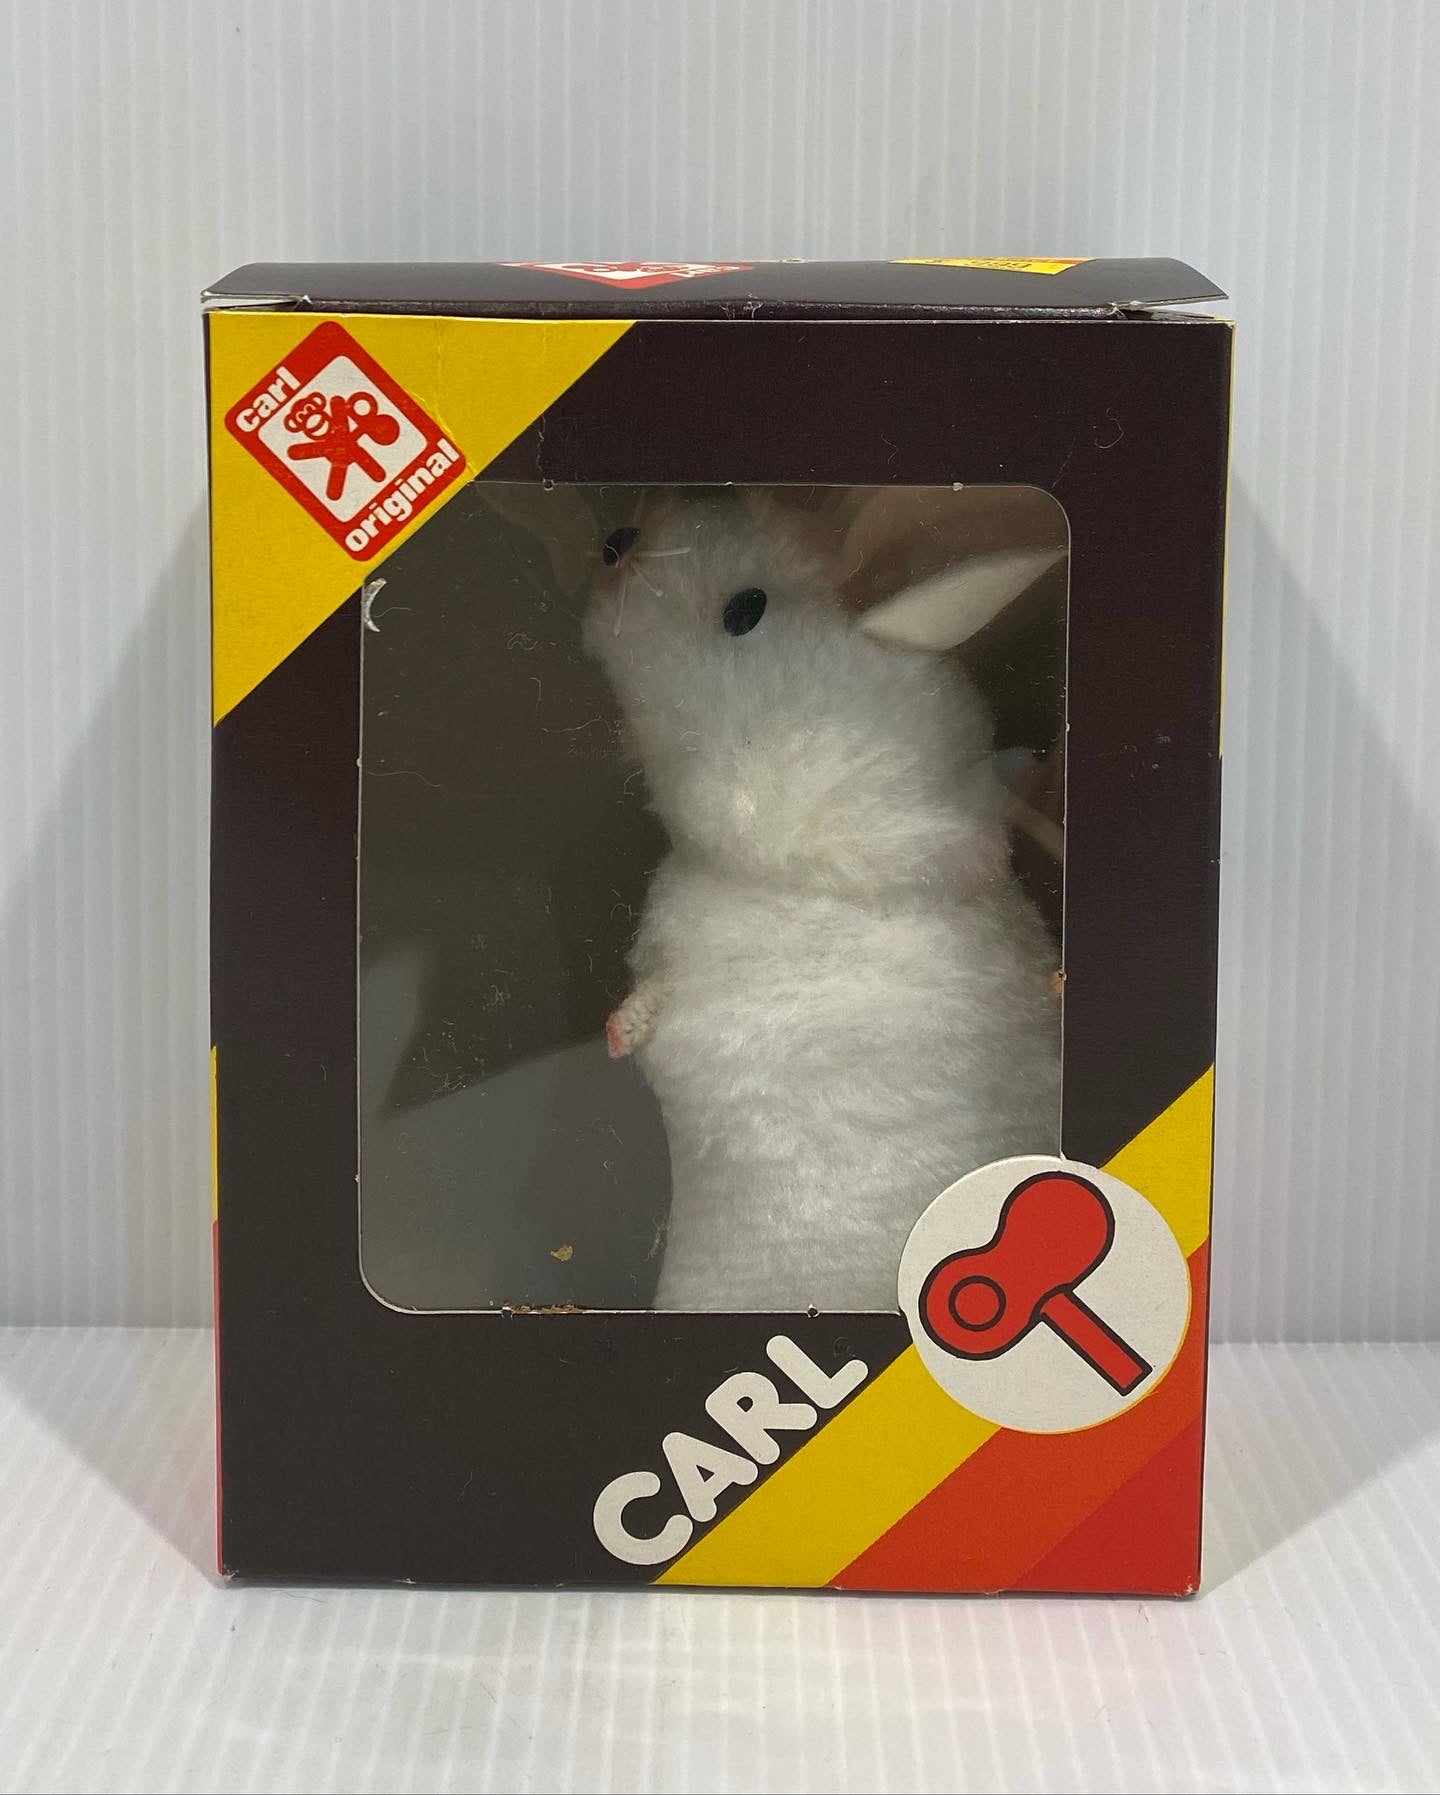 Vintage Max Carl Original Toy Mechanical wind up Mouse. New in the Original Box